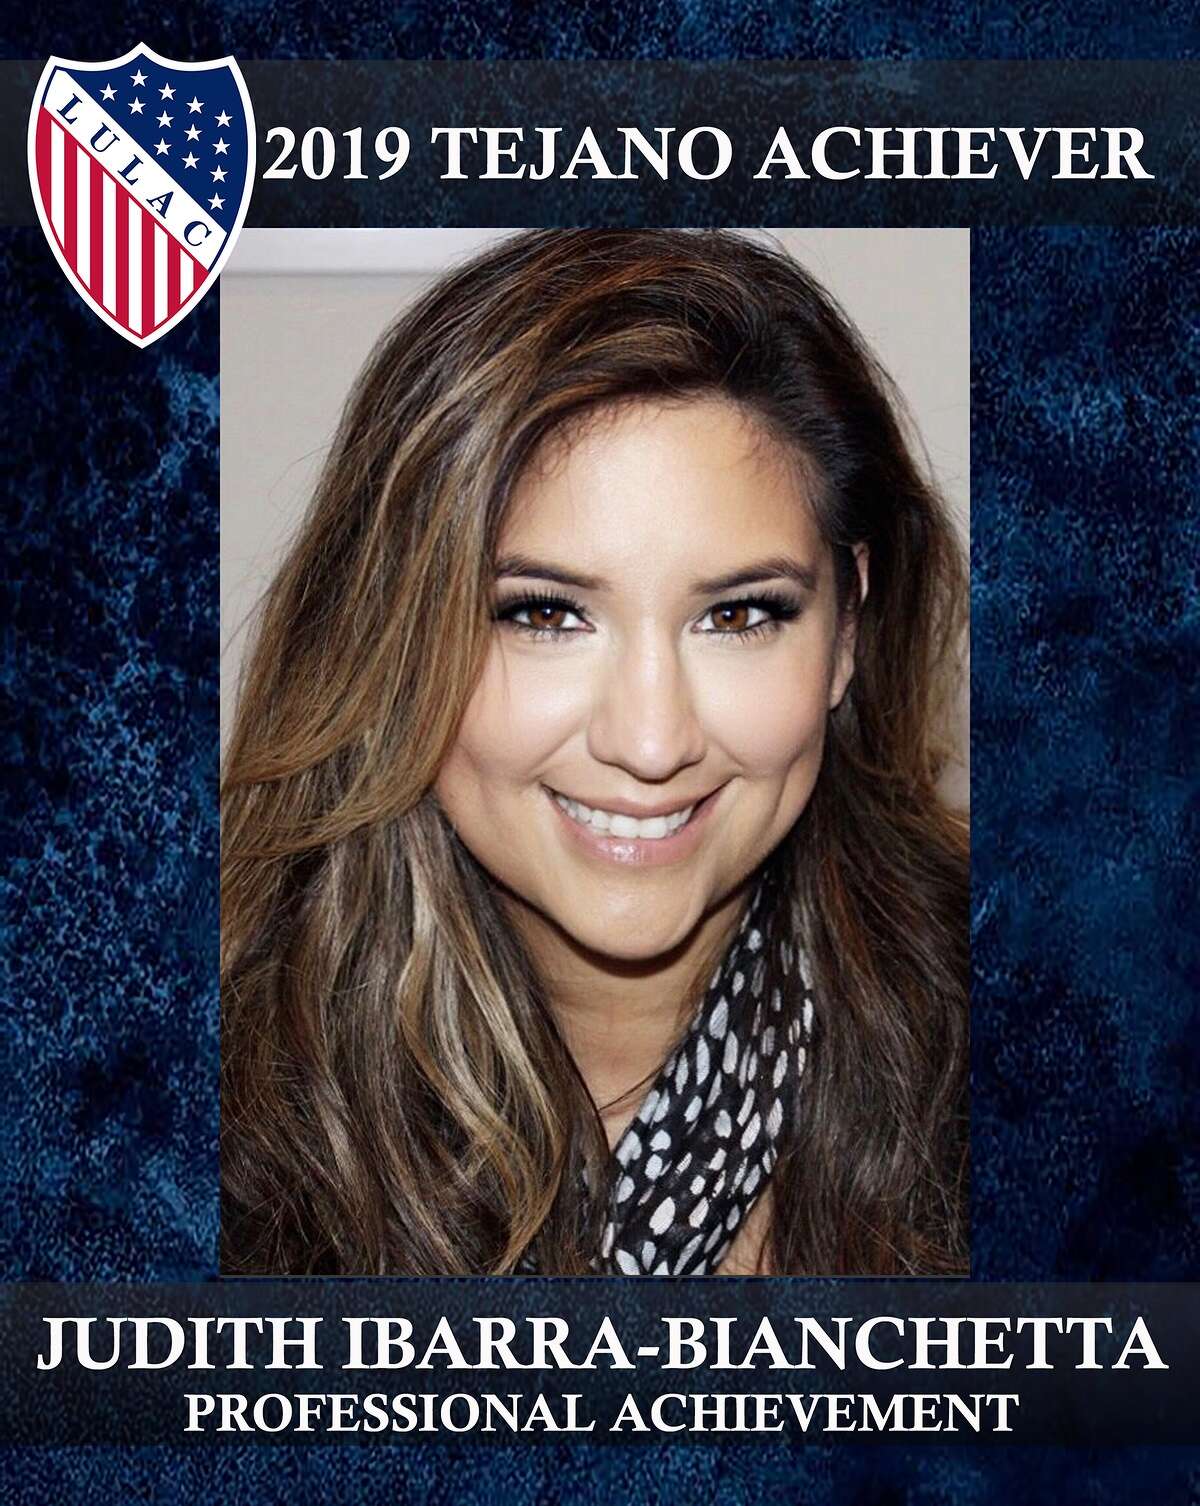 Judith Ibarra-Bianchetta — Professional Achievement is one of the 2019 Tejano Achiever honorees.com